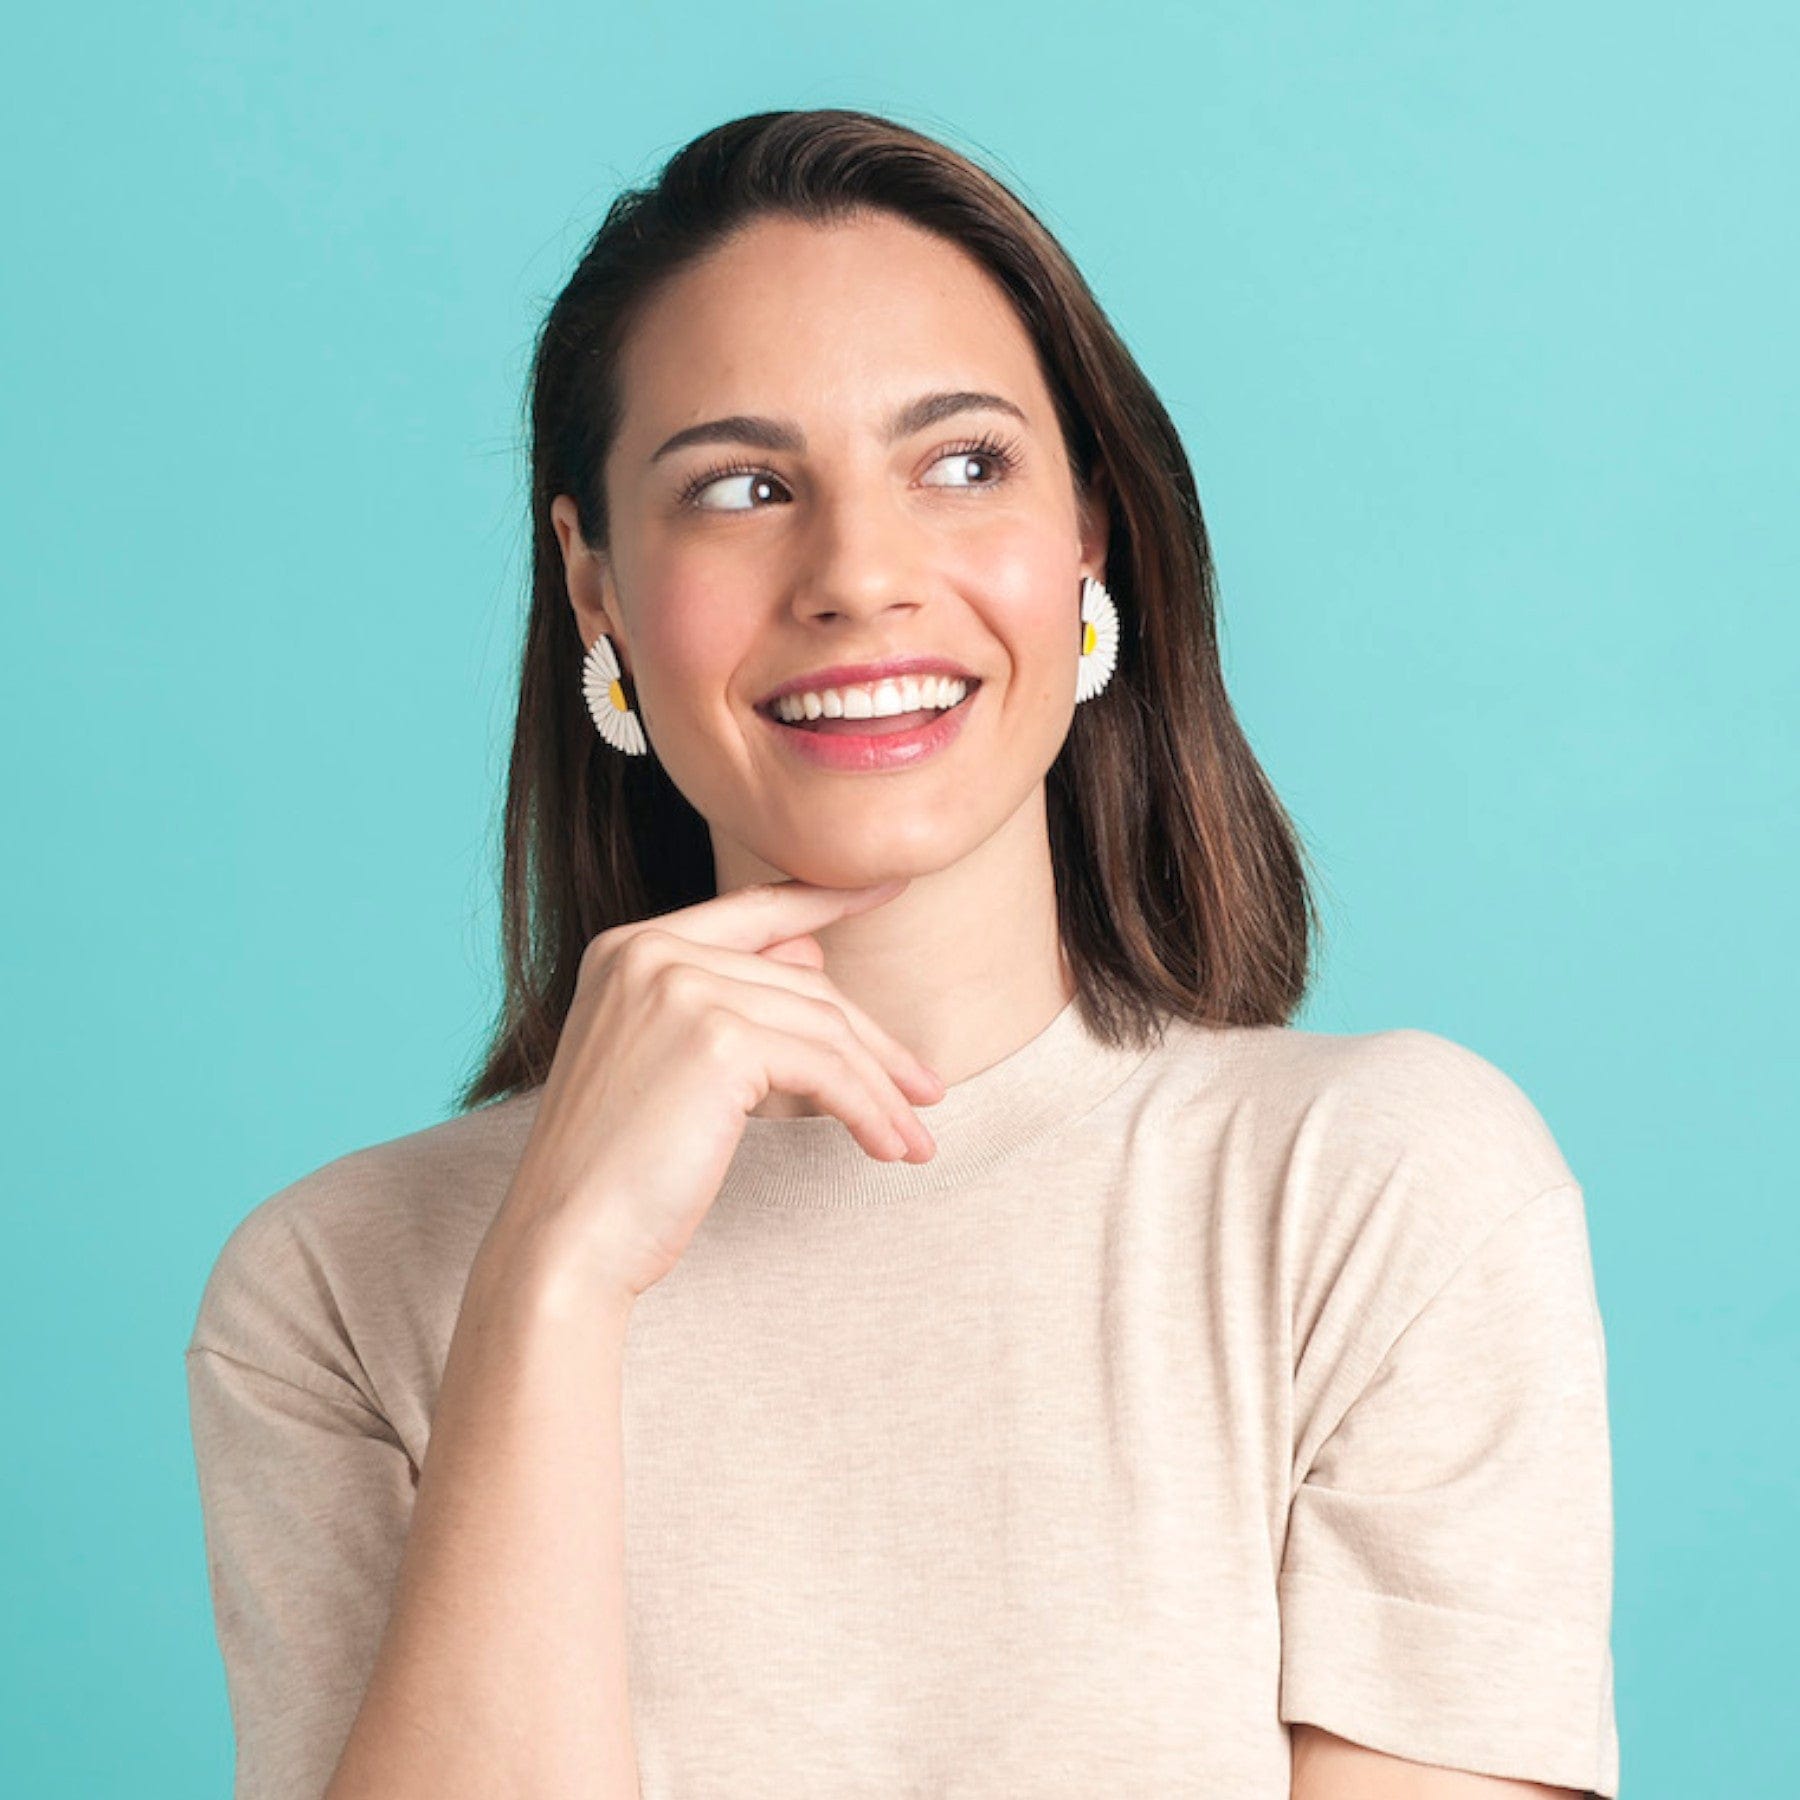 Smiling young woman with daisy earrings looking away thoughtfully against a teal background, wearing a beige top.